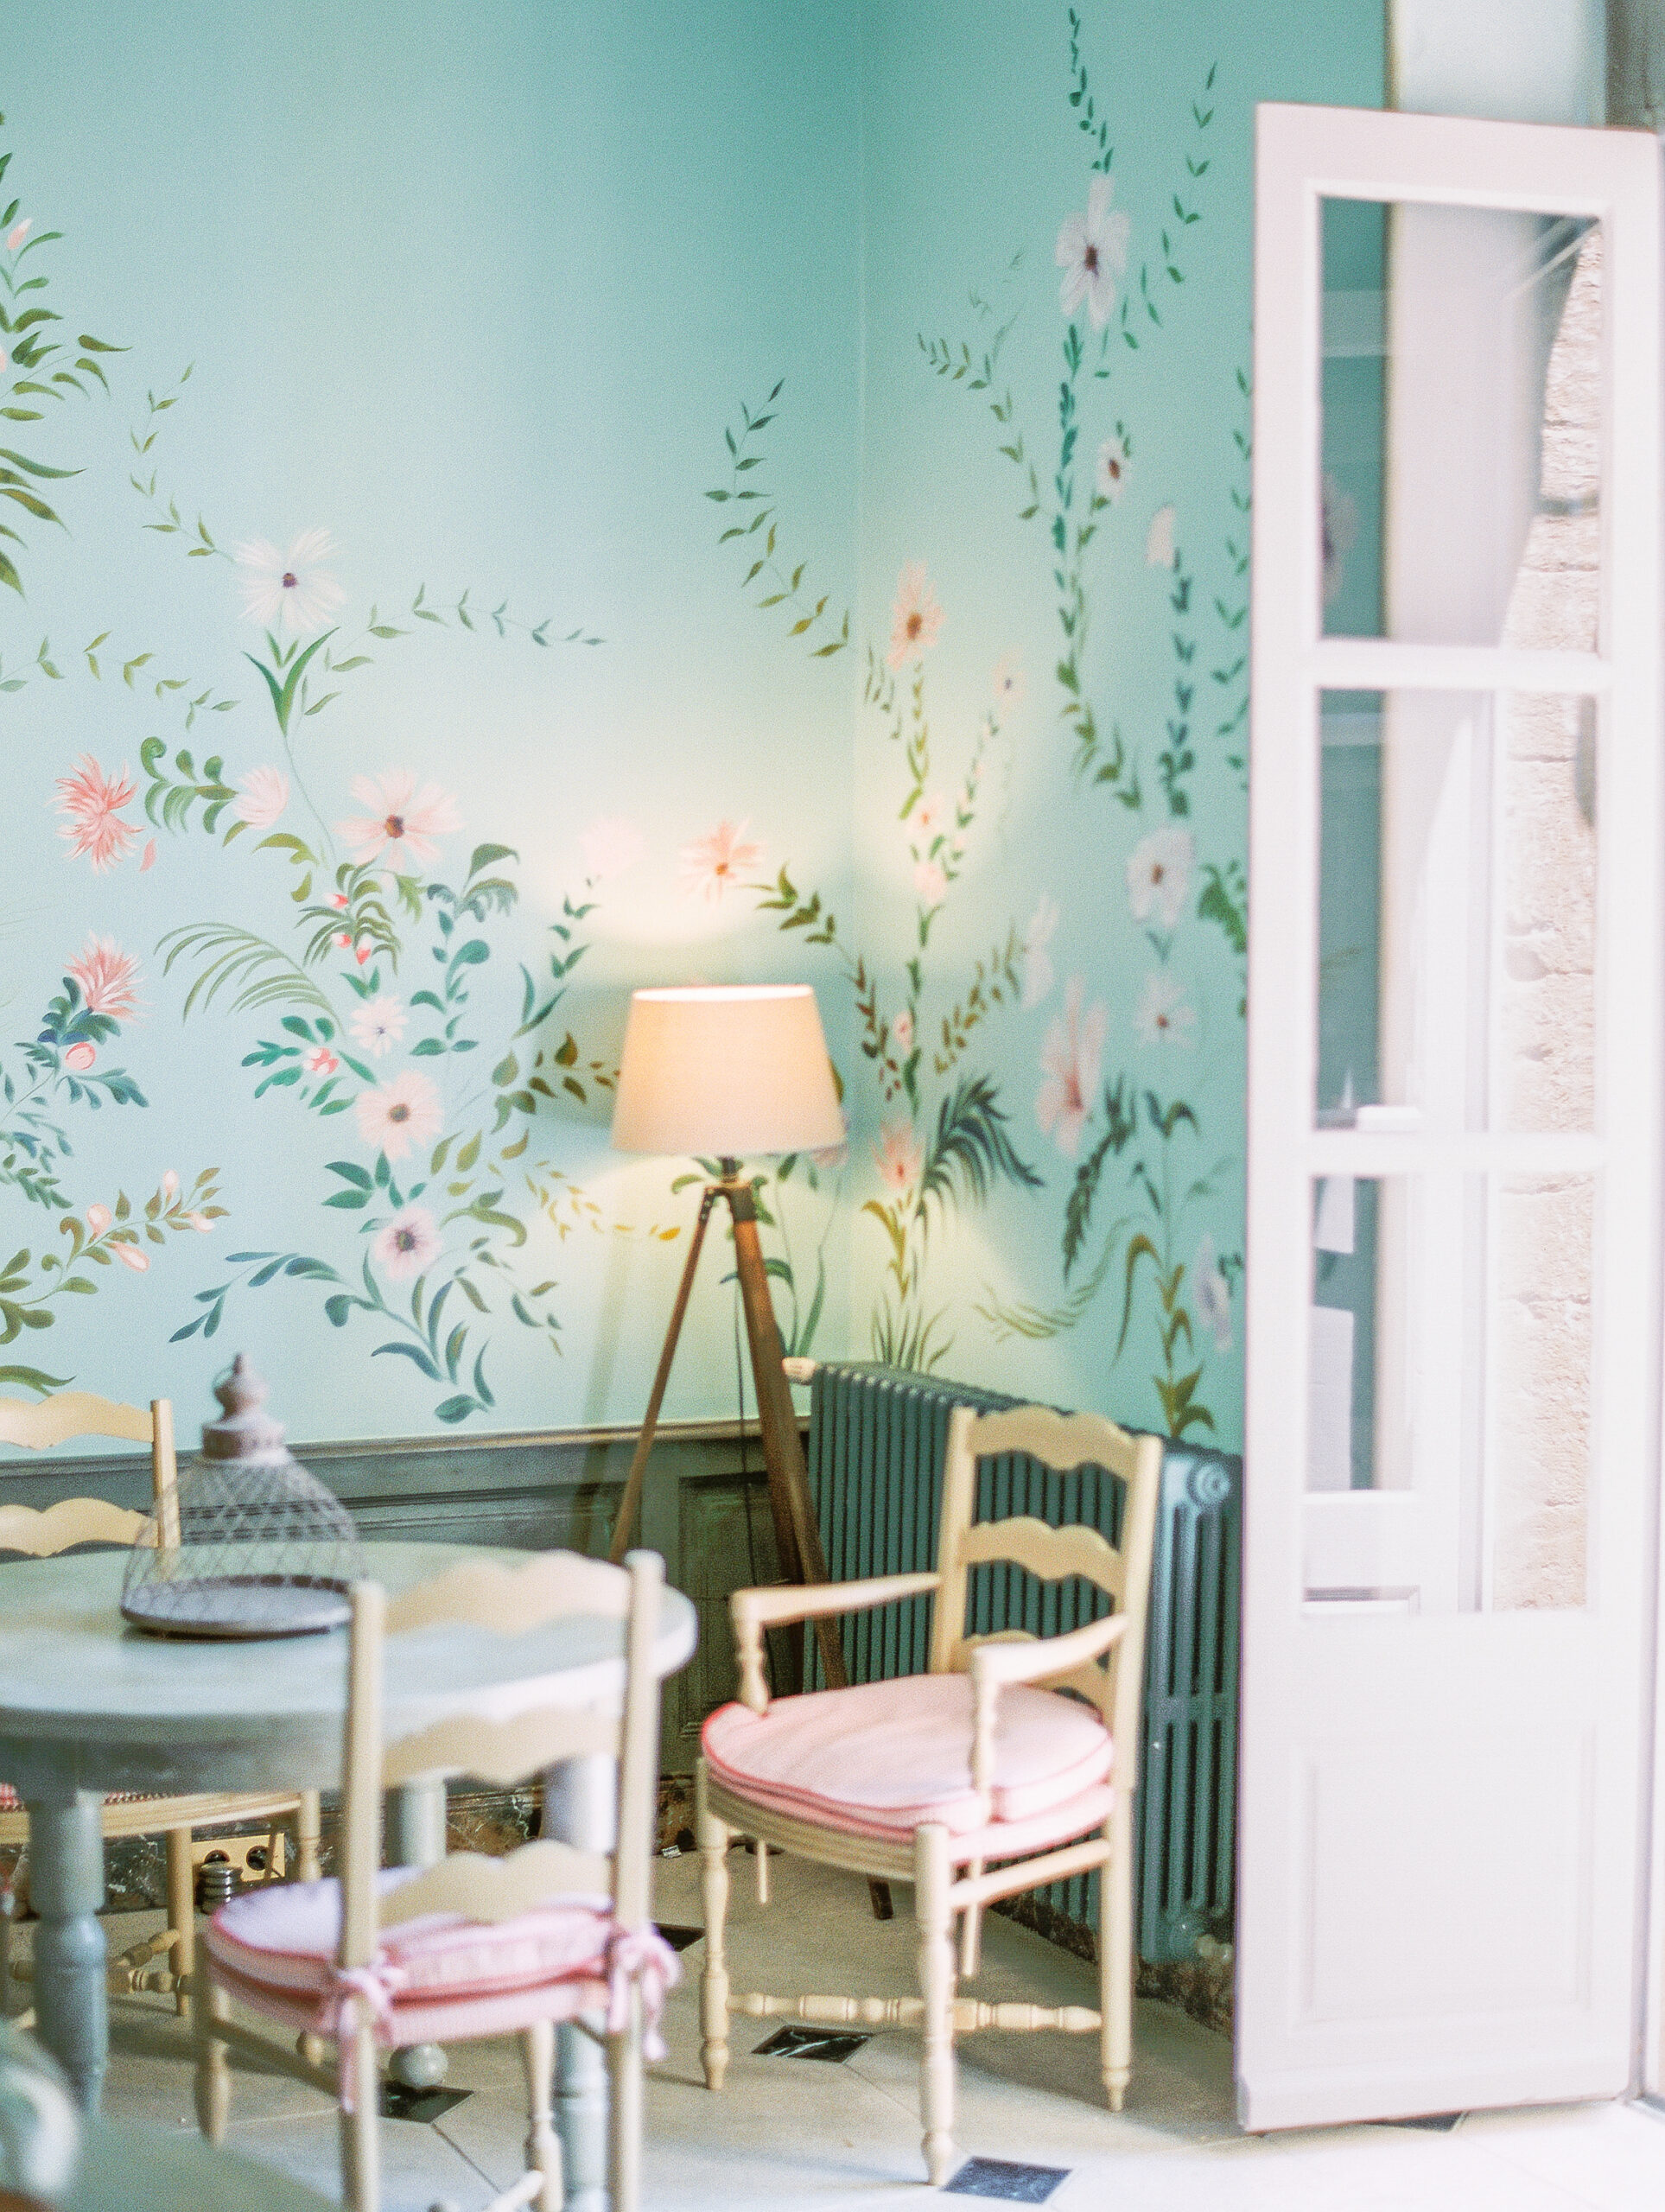 chateau de varenne breakfast room with blue walls and handpainted floral mural